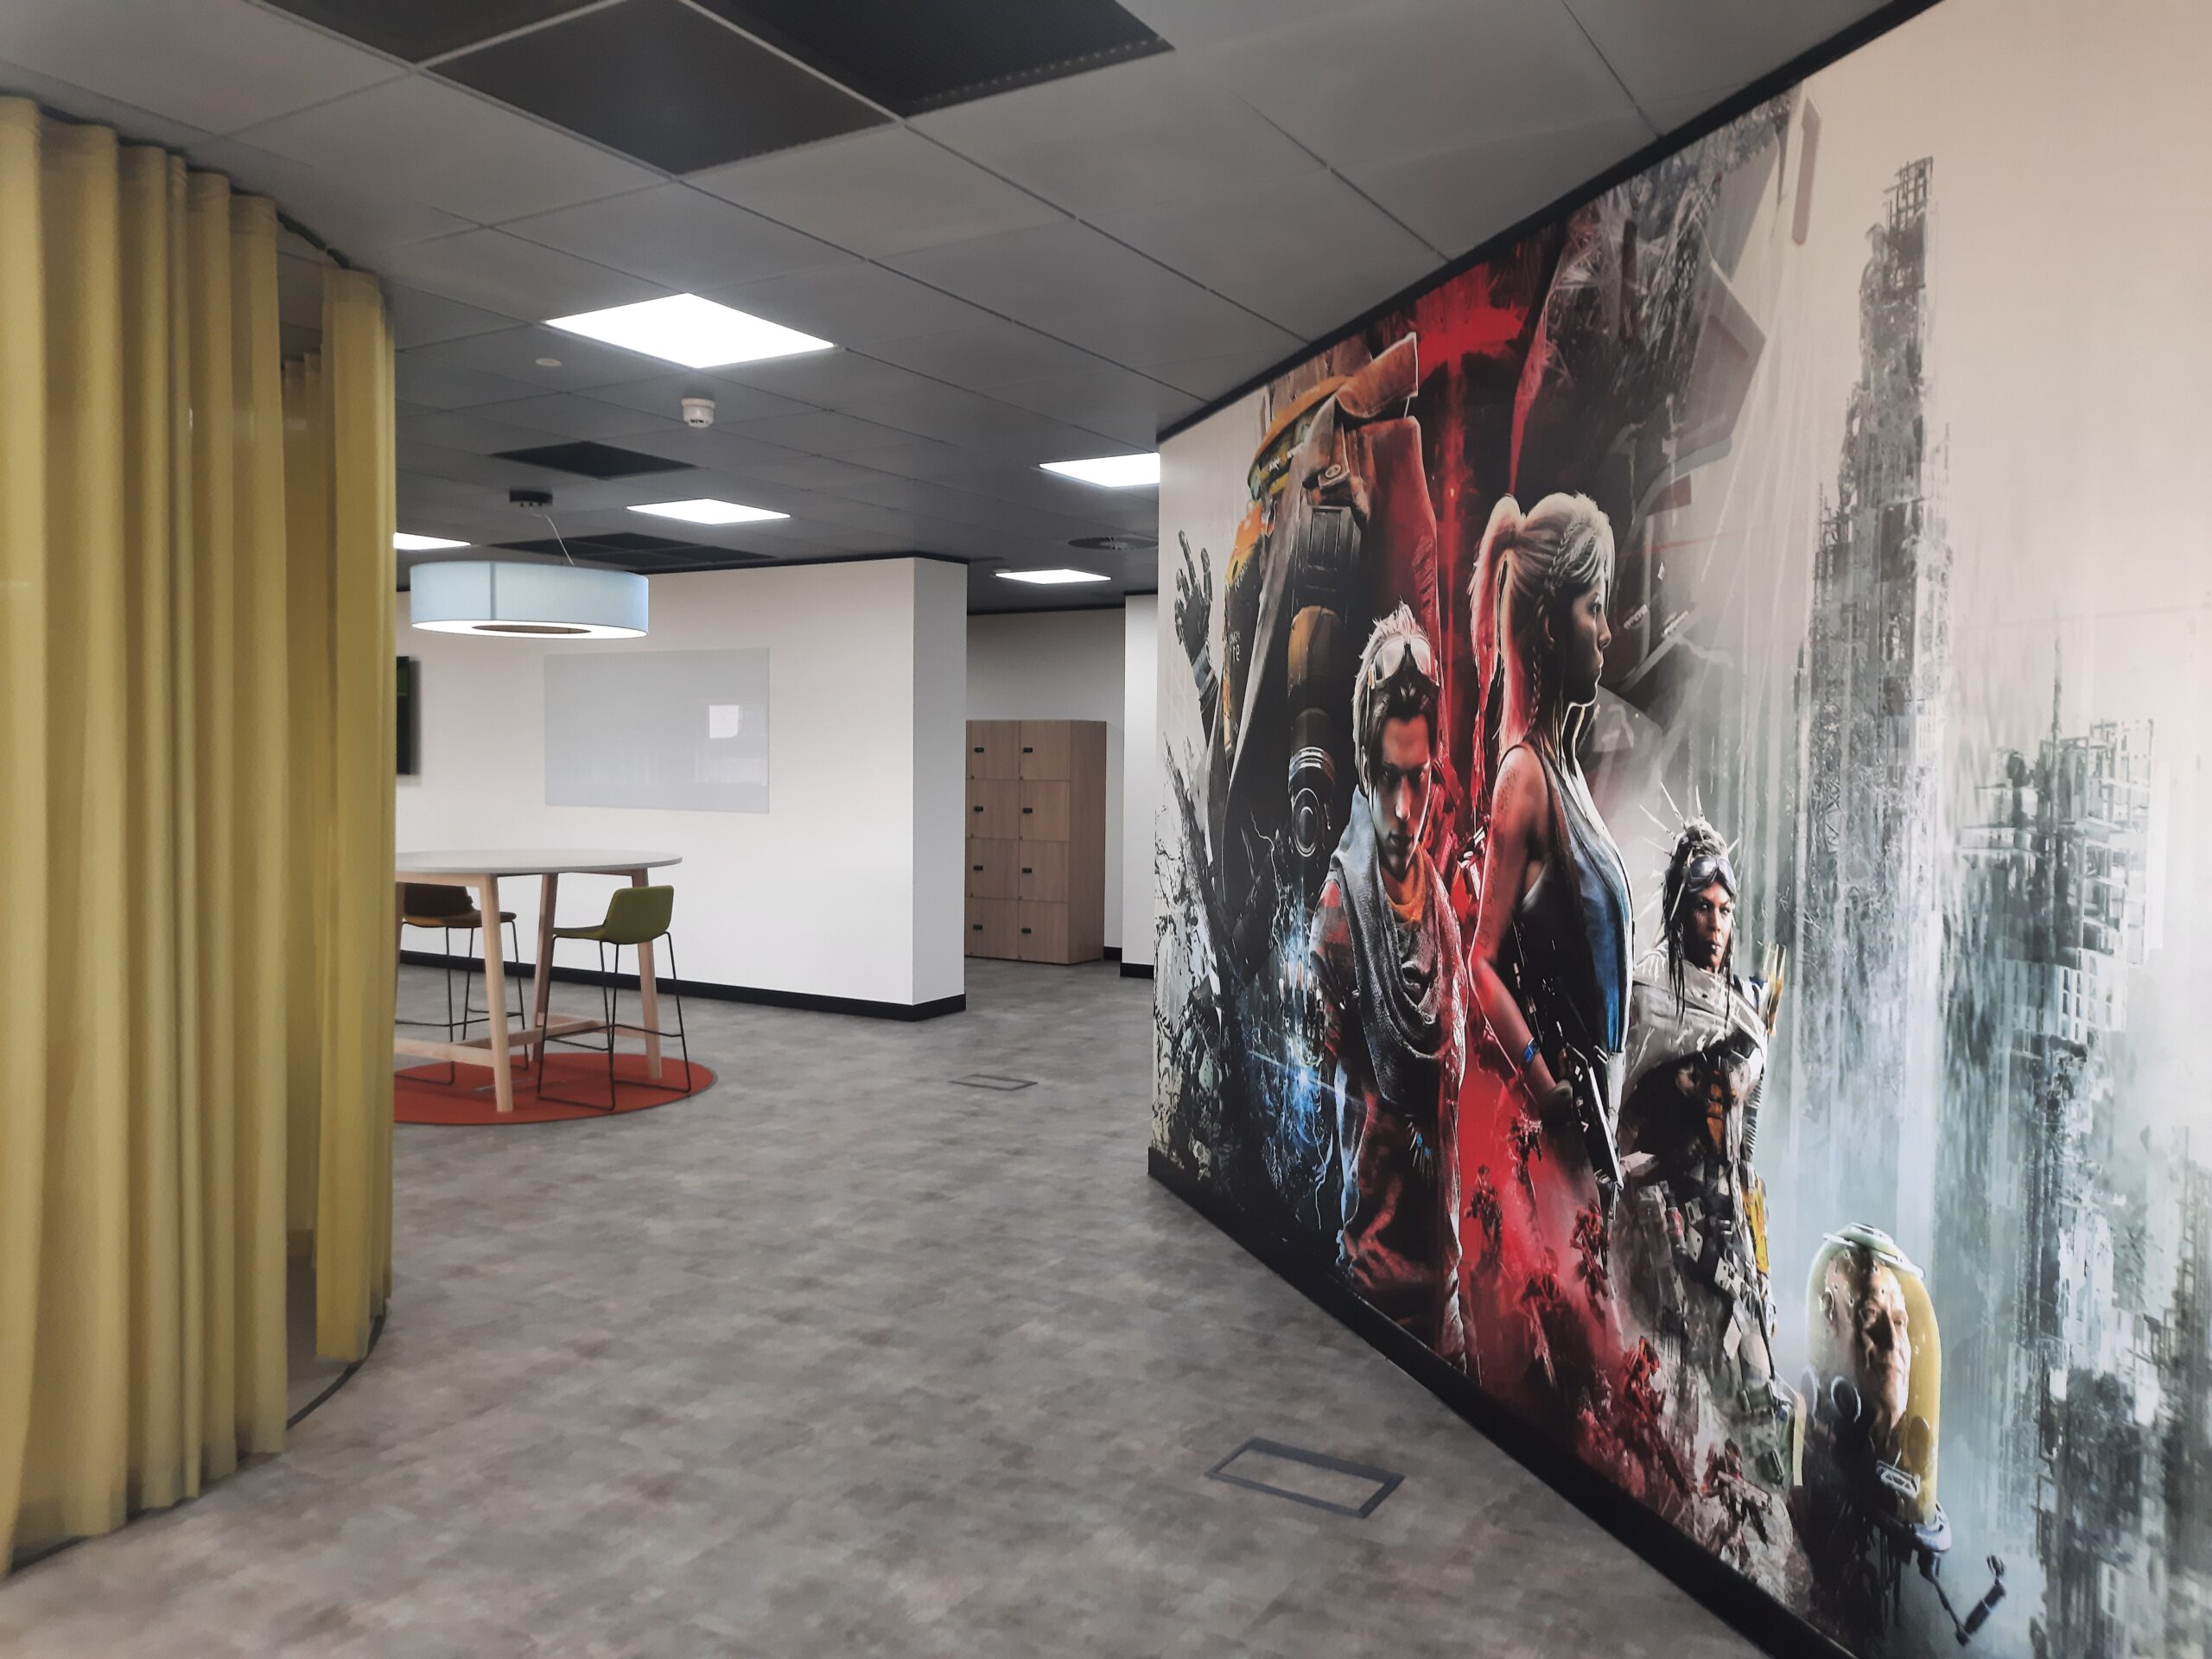 505 Games Office Fit Out